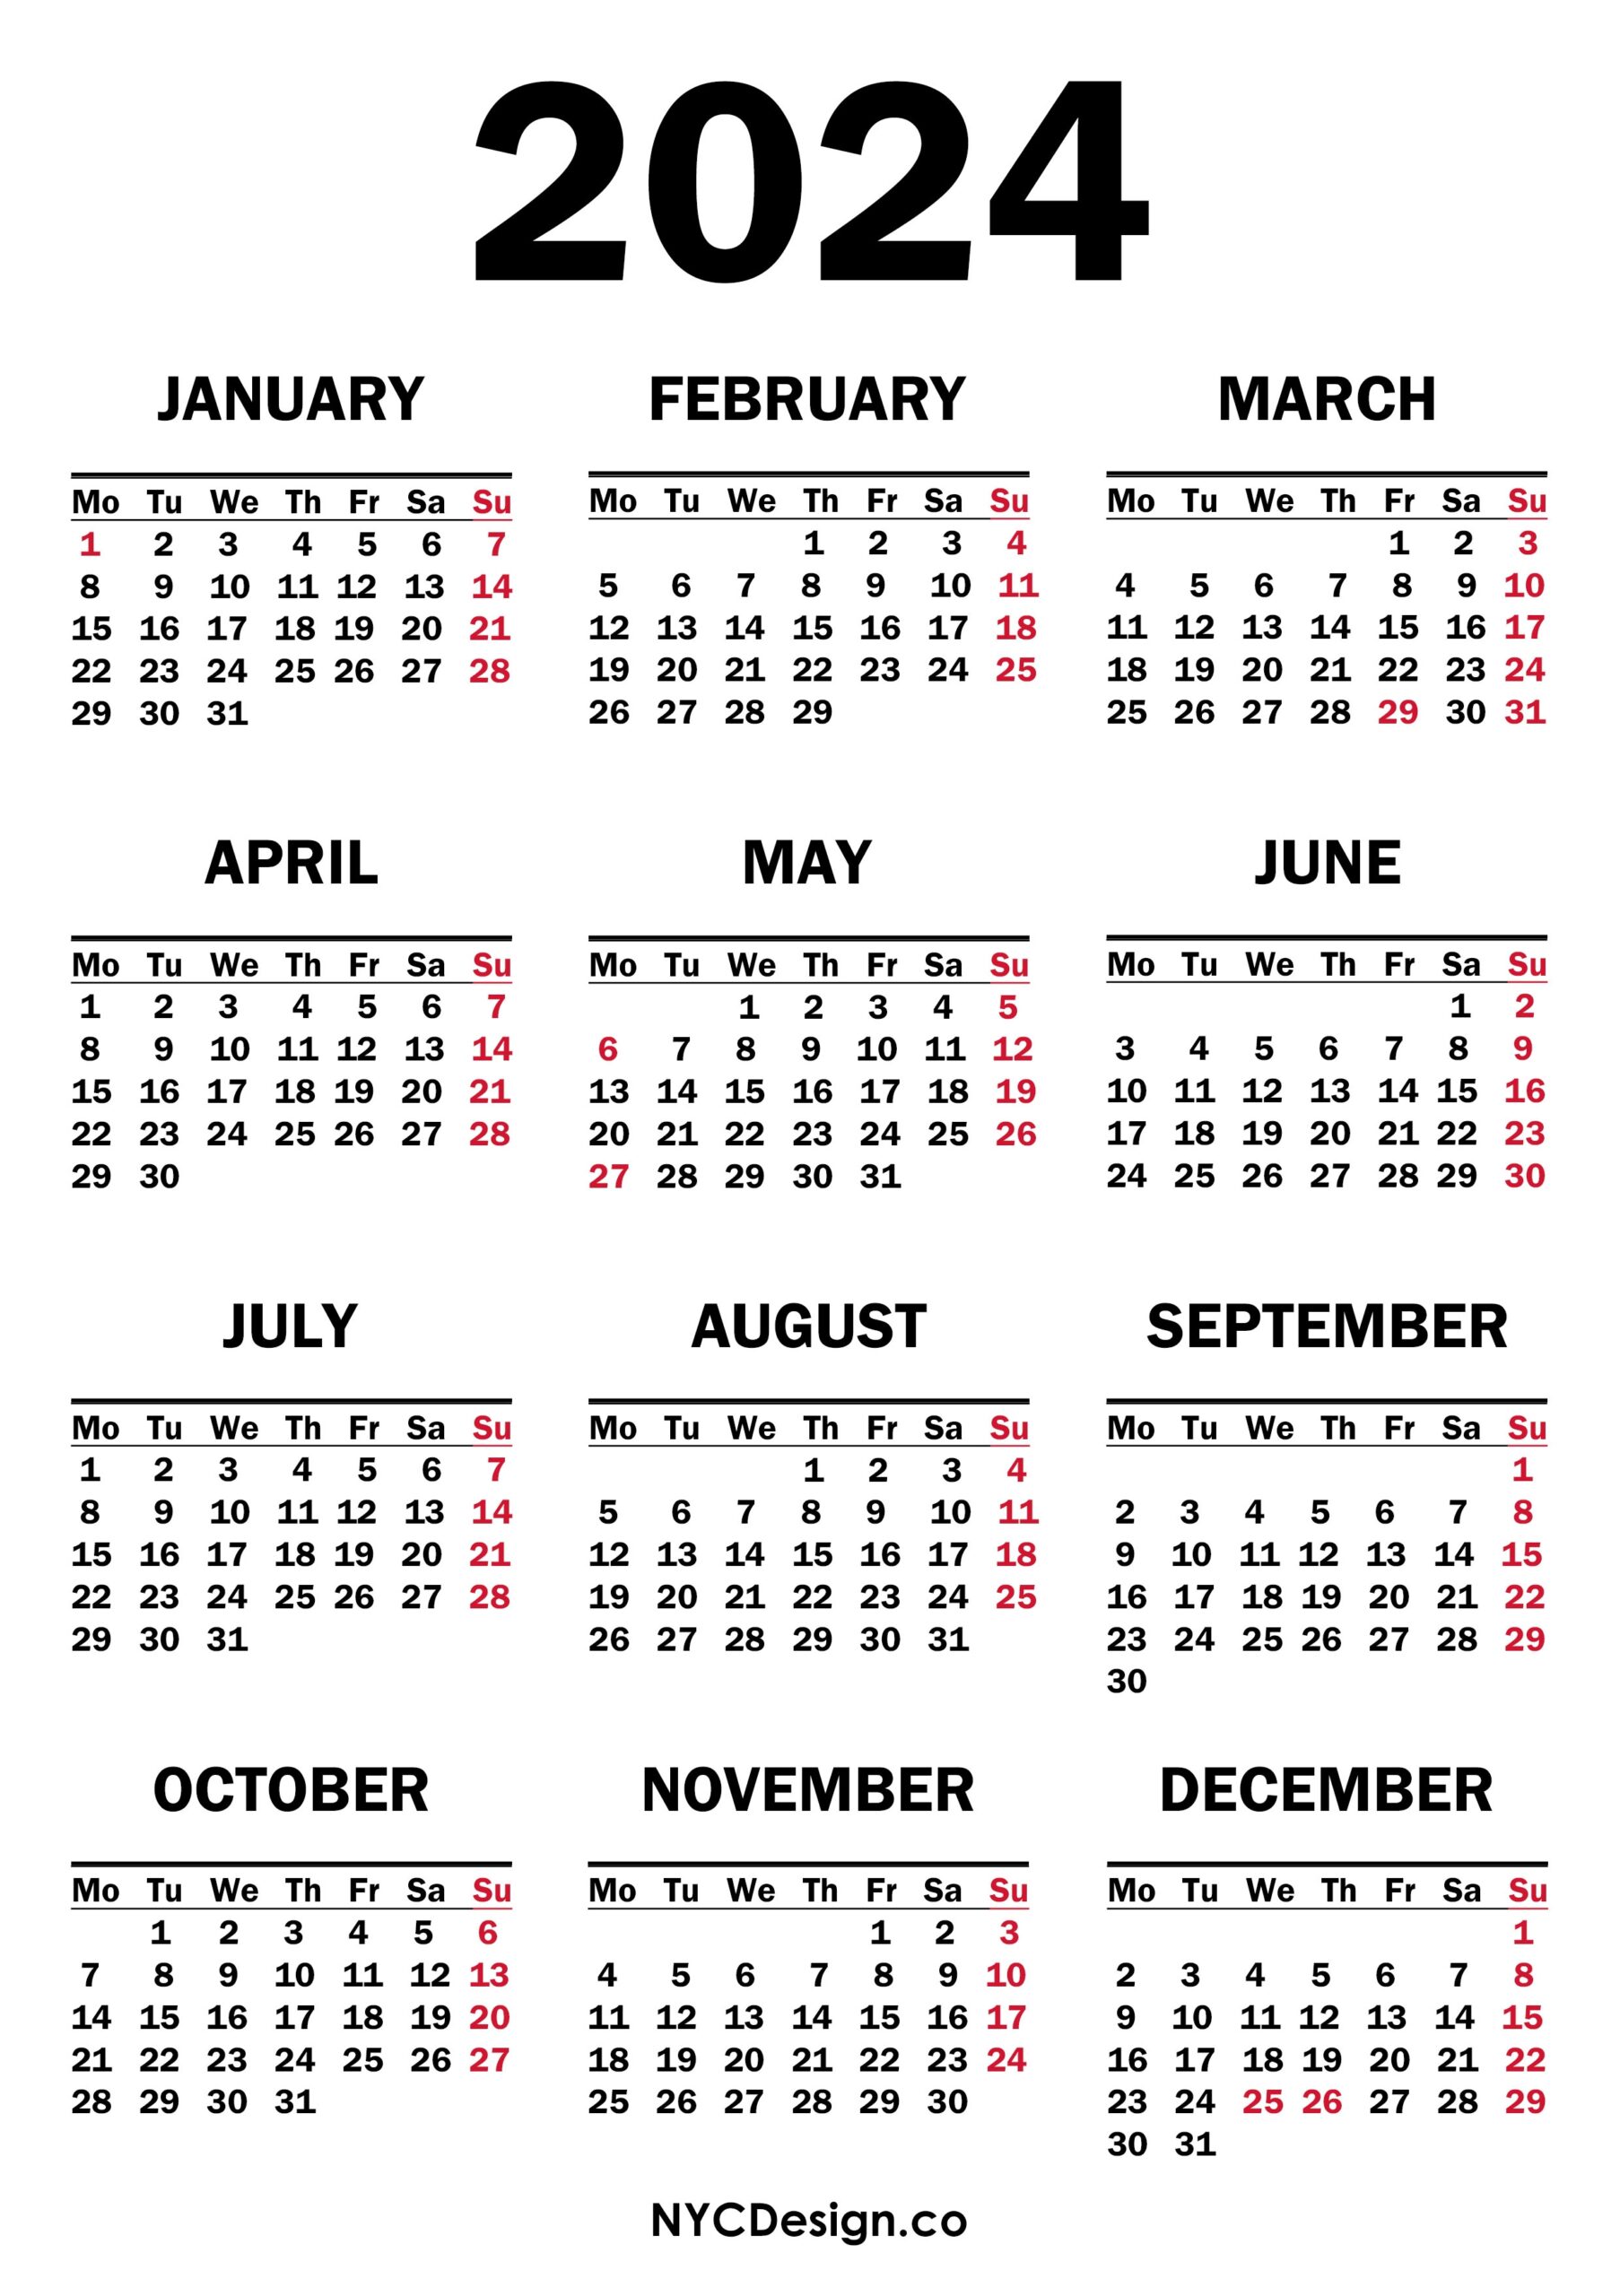 2024 Calendar With Holidays Printable Customize And Print - Free Printable 2024 September-December Calendar With Holidays